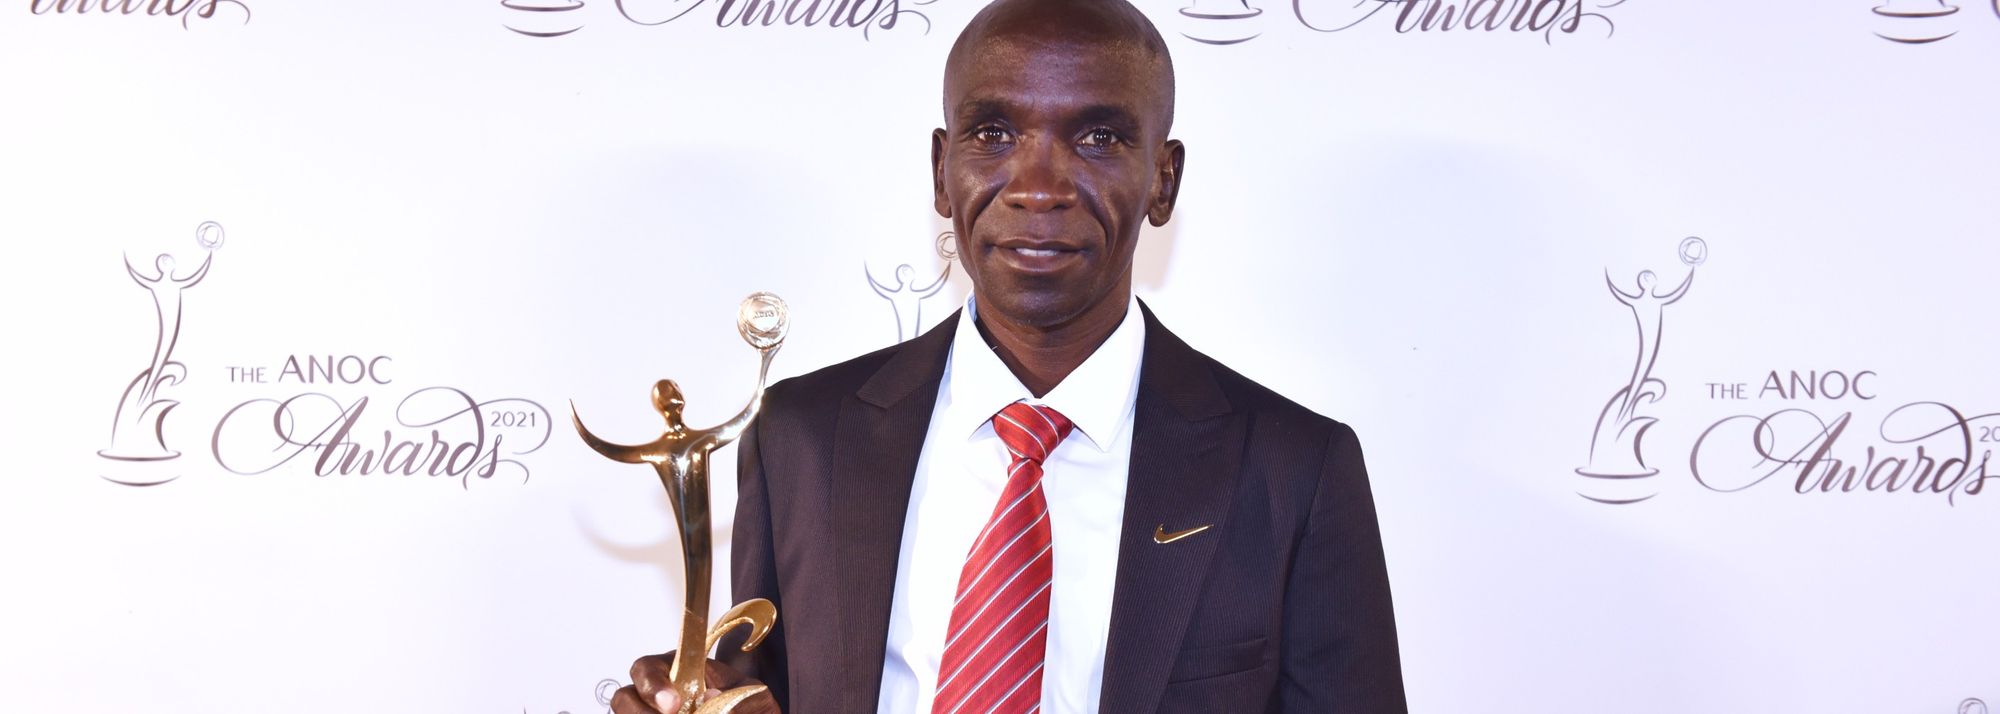 Eliud Kipchoge has been named the best male athlete of the Tokyo 2020 Olympic Games at the Association of National Olympic Committees Awards.